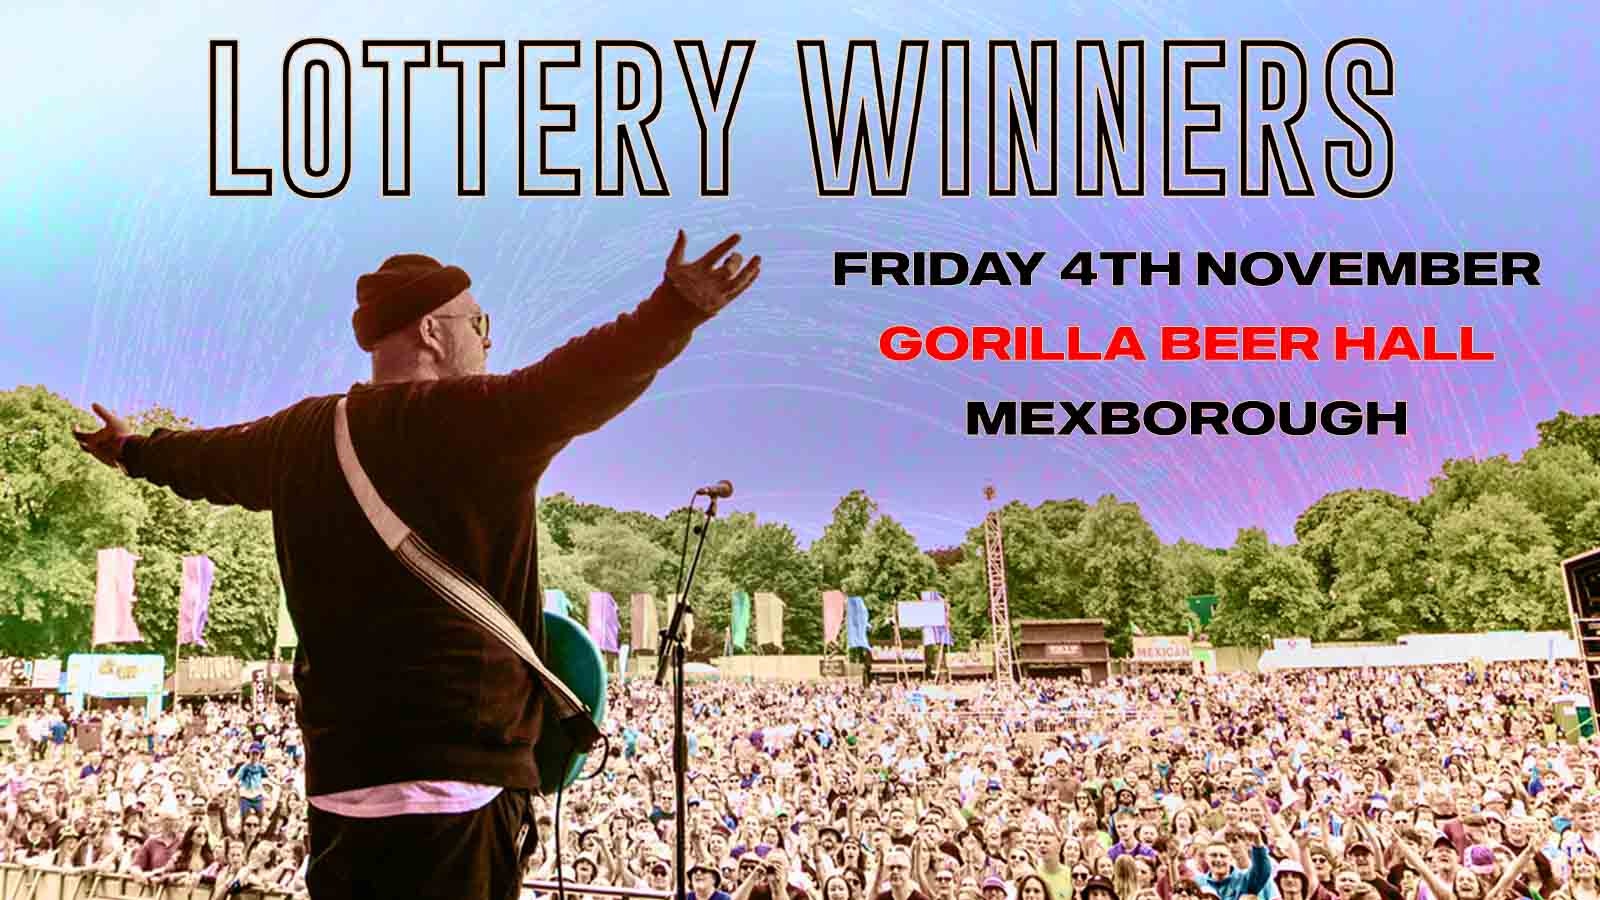 Lottery Winners at Gorilla Beer Hall, Mexborough